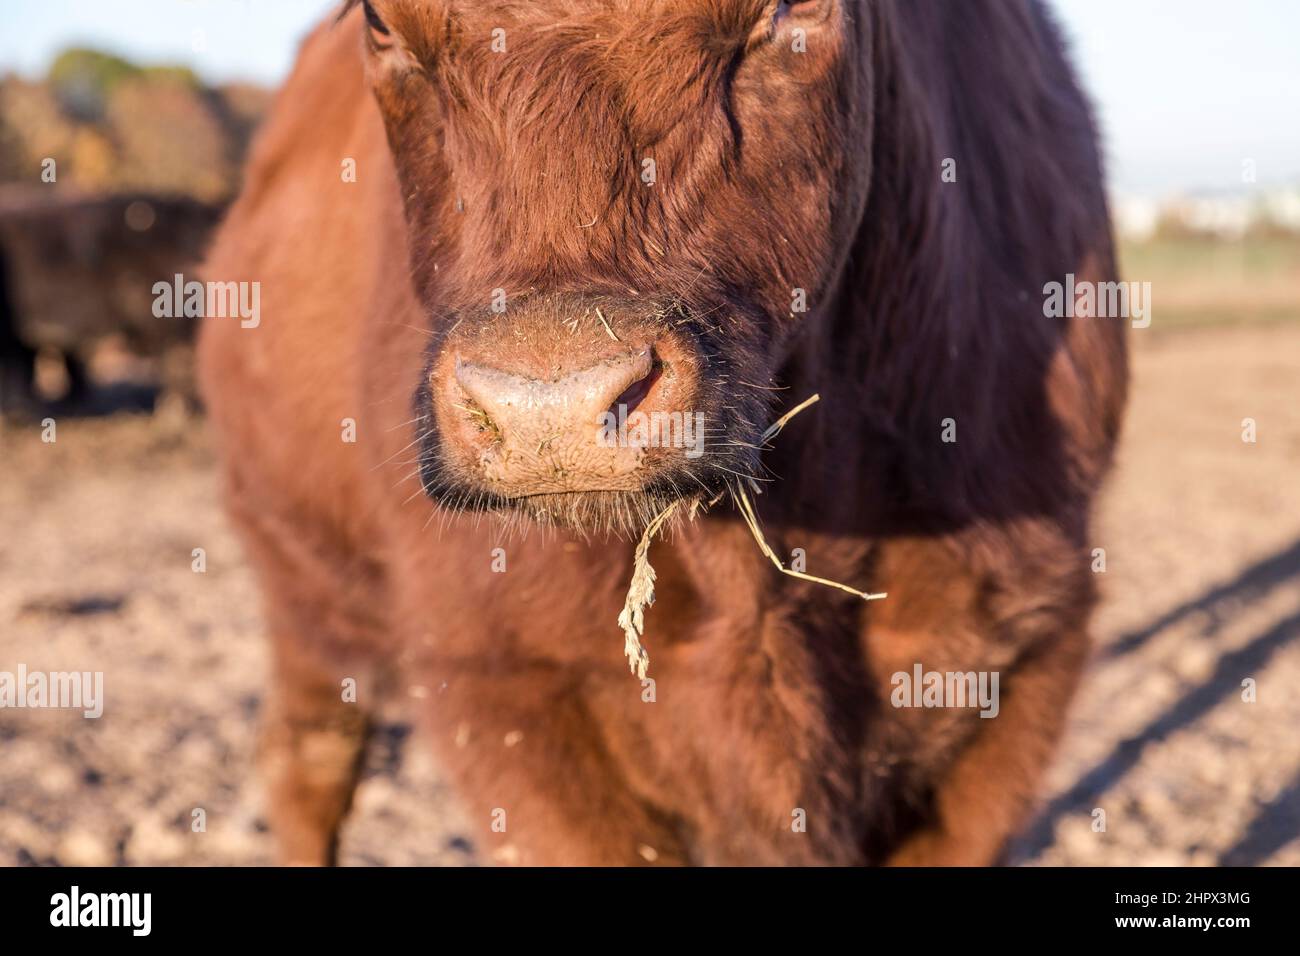 detail of muzzle of grazing cow at the meadow Stock Photo